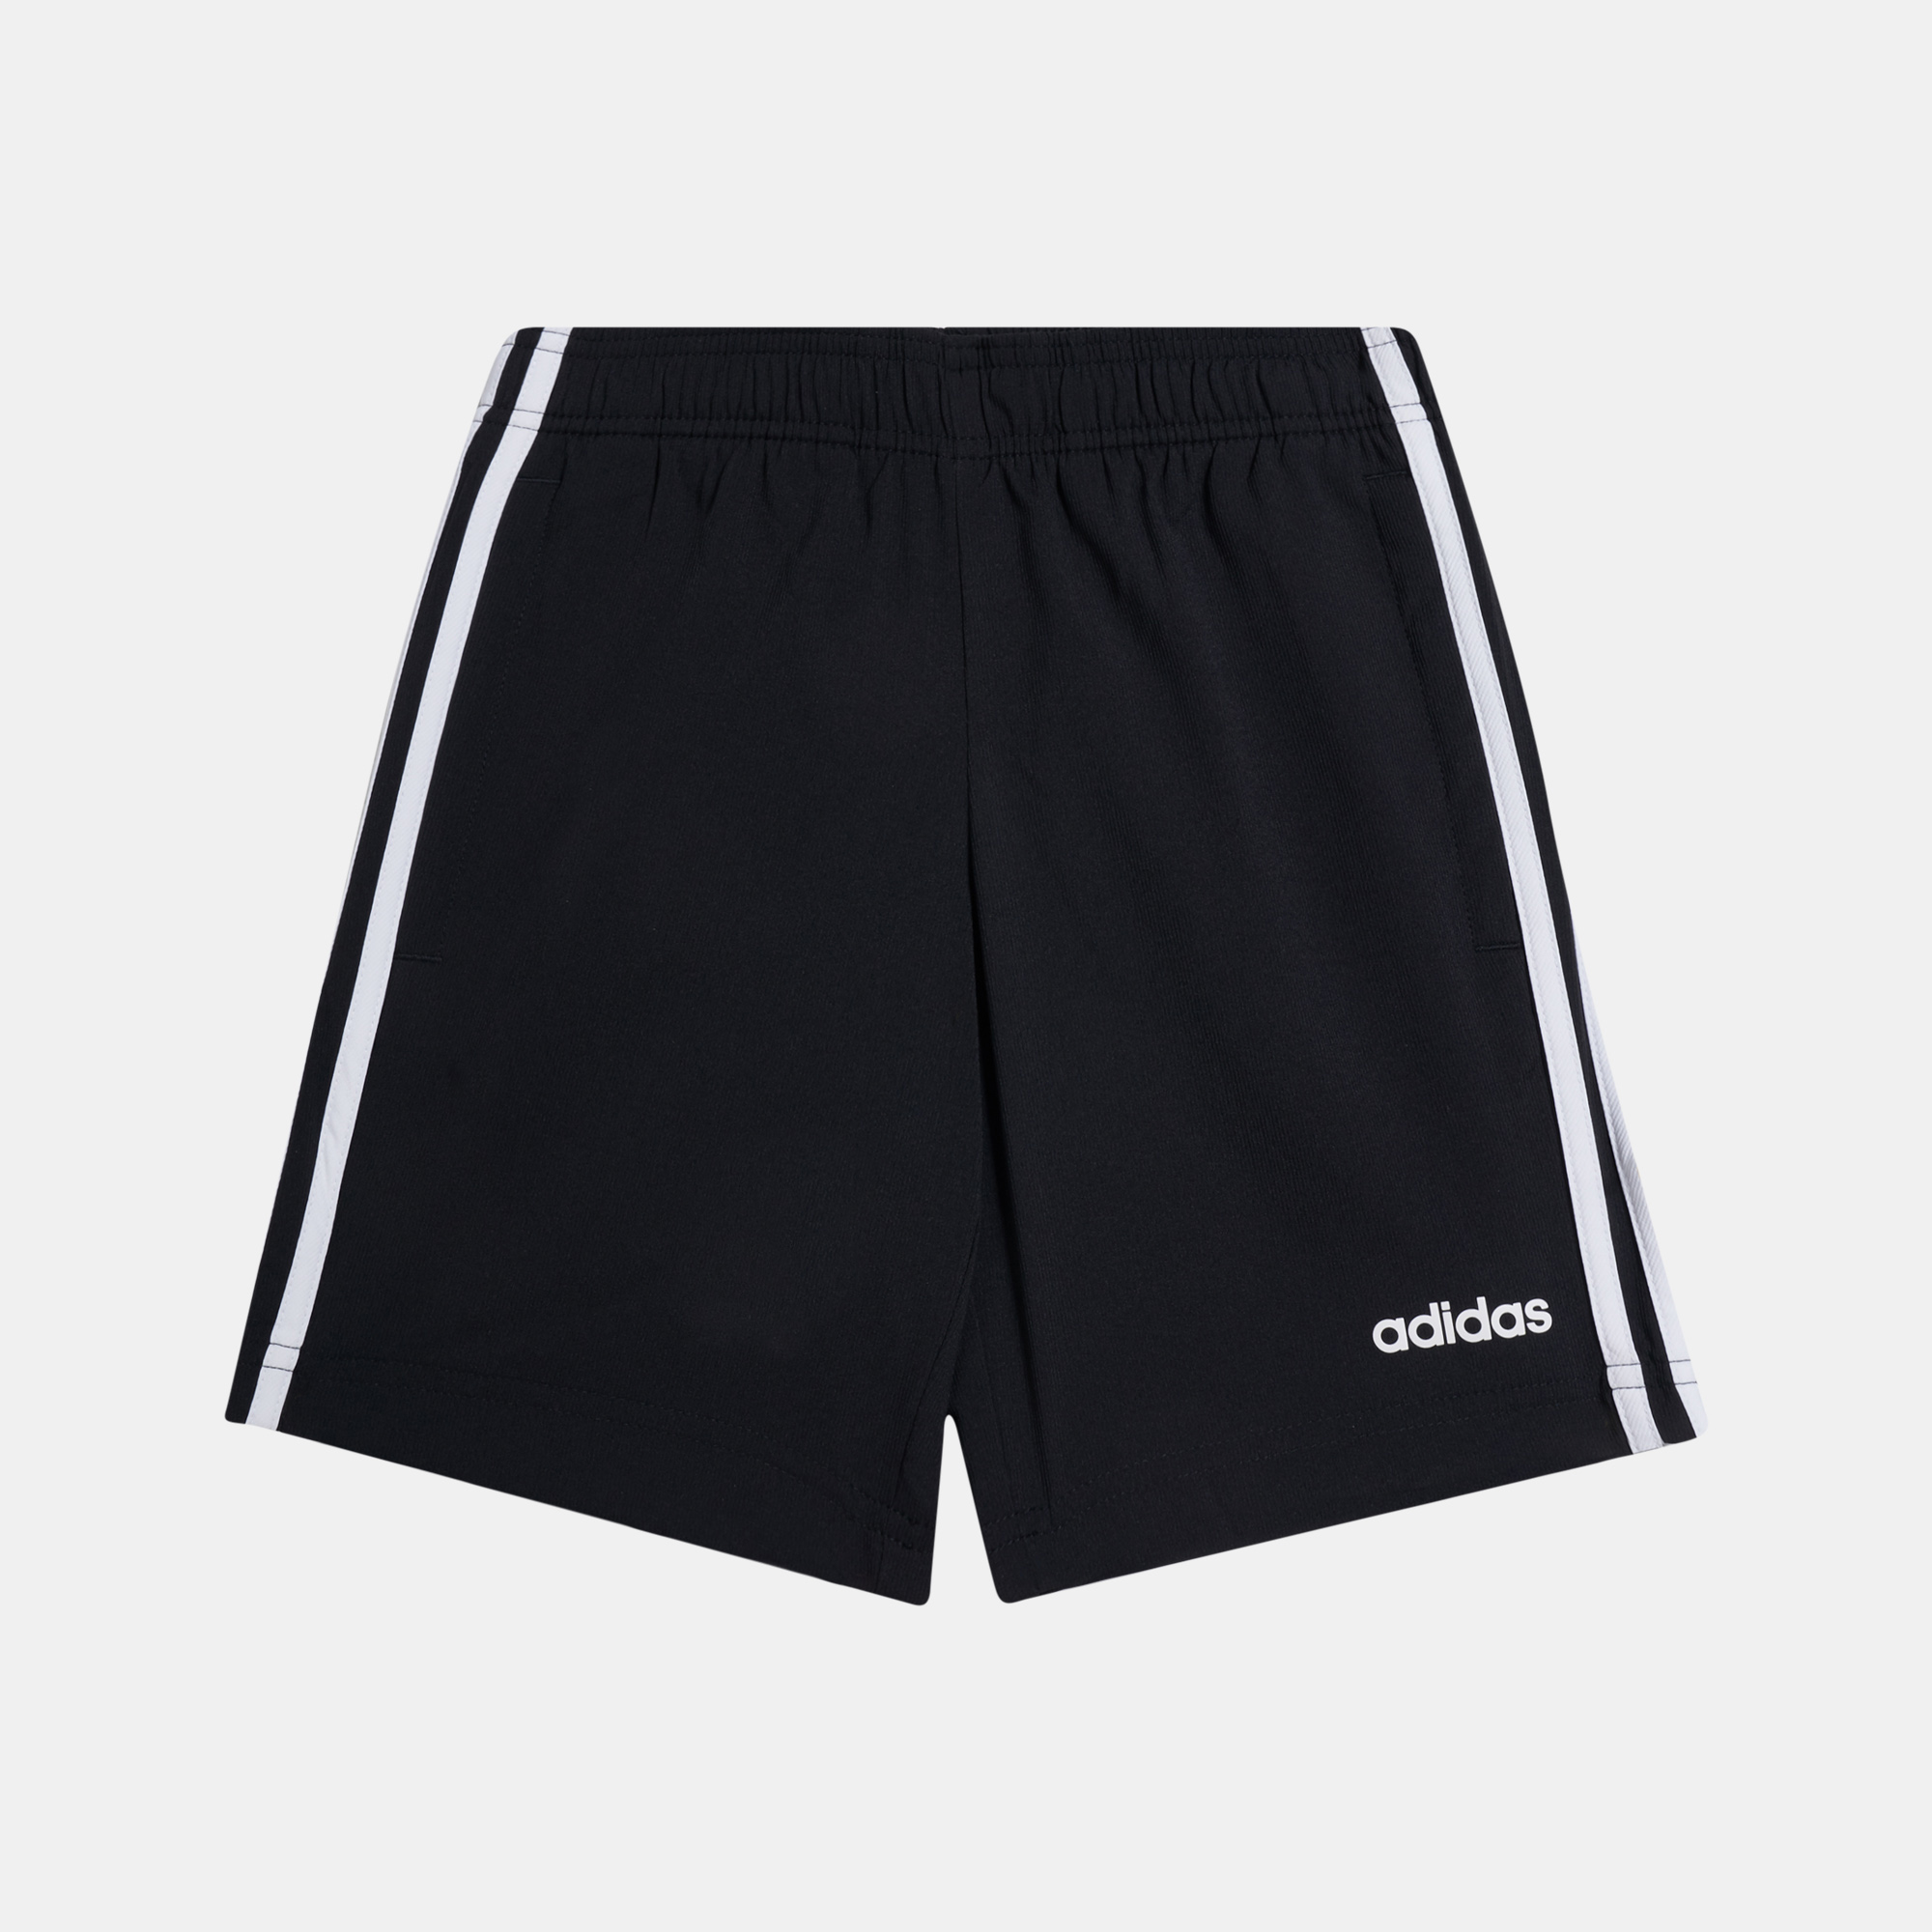 adidas Kids' Essentials 3-Stripes Woven Shorts (Younger Kids) | Shorts ...